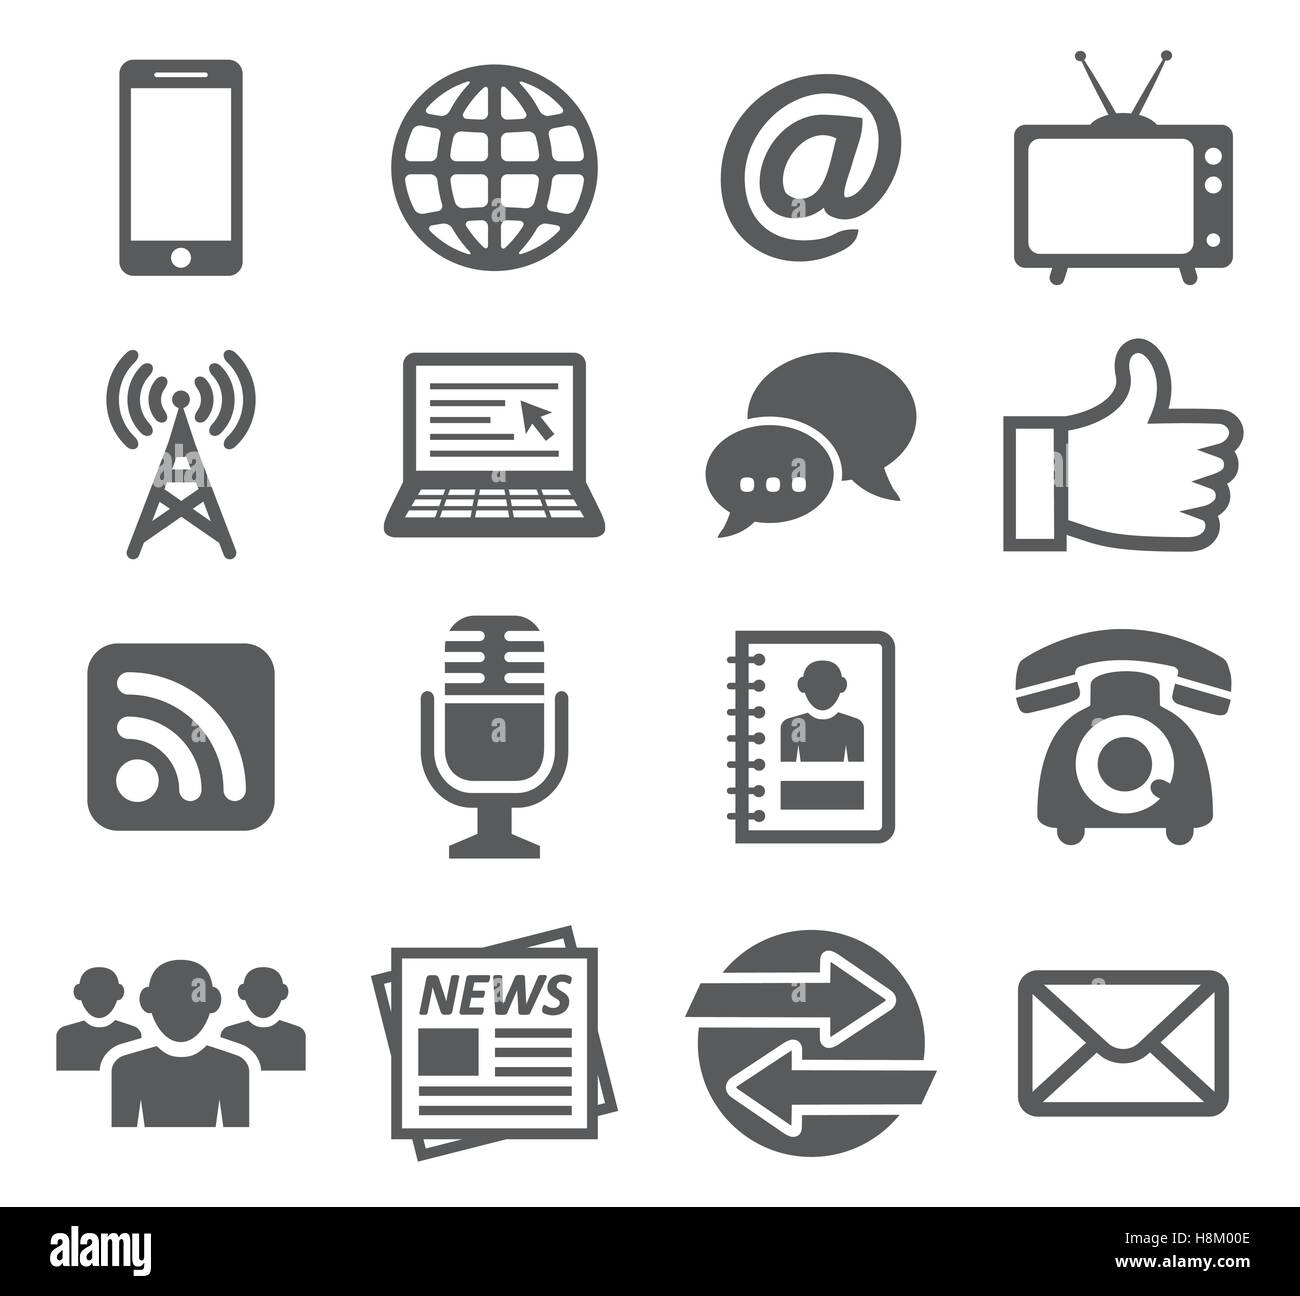 Communication icons Stock Vector